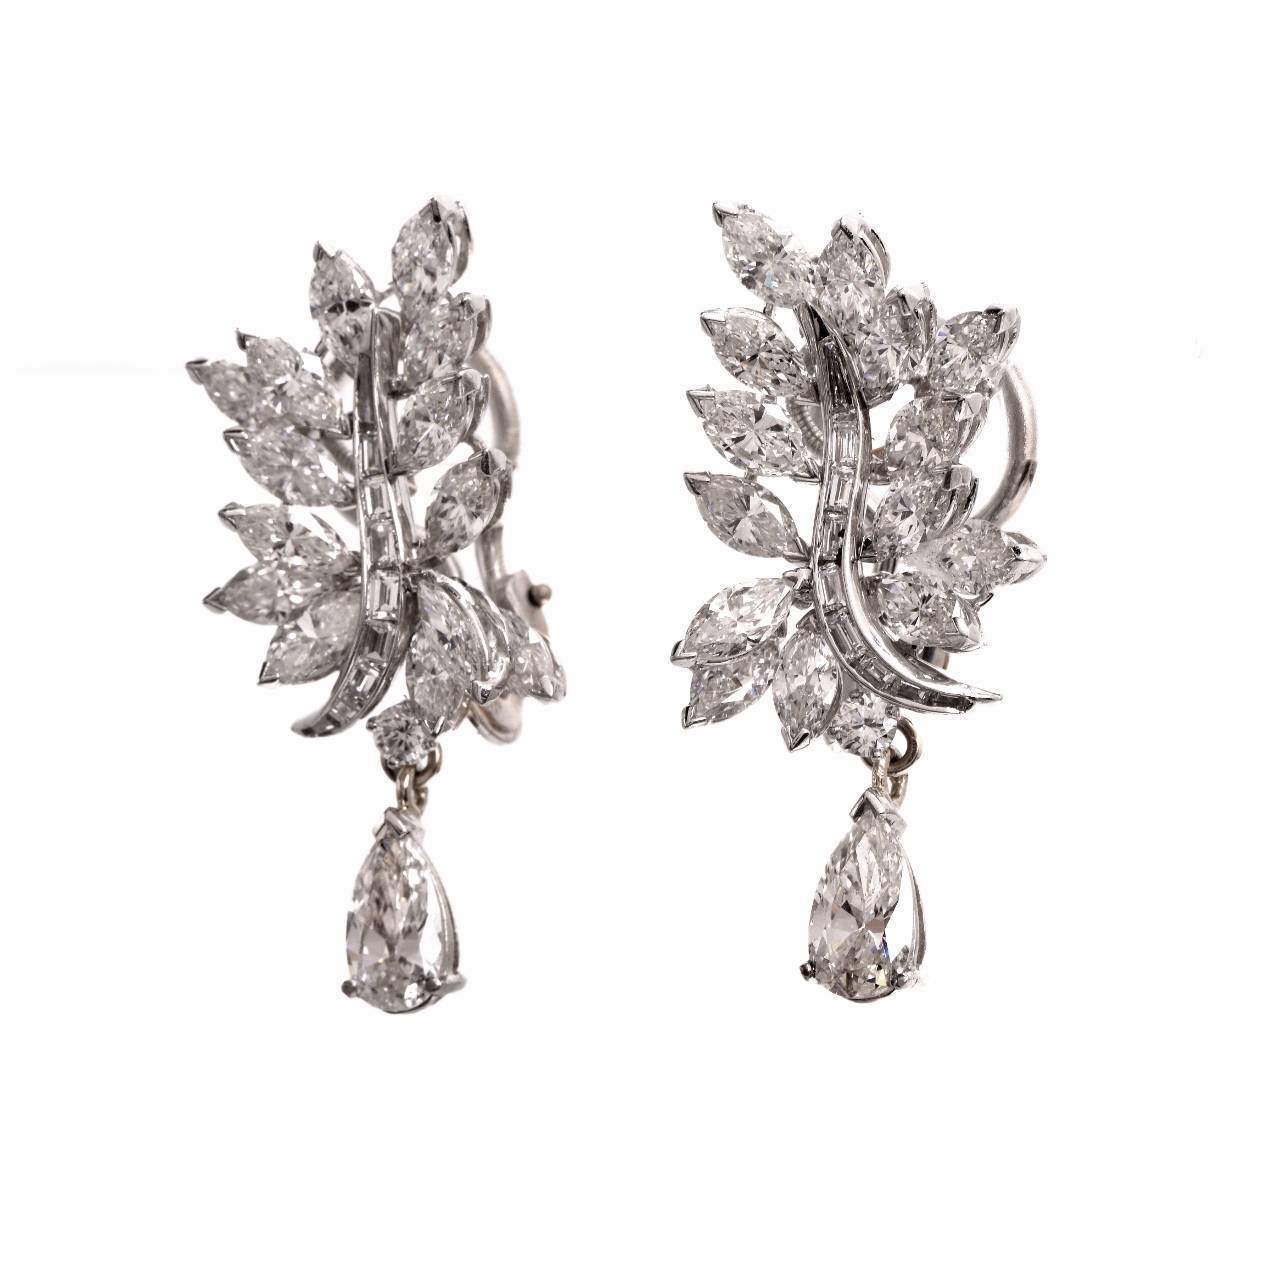 These  estate  earrings of extravagant aesthetic and outstanding elegance are crafted in platinum  weighing approx. 15.7 grams and measuring  1.5 